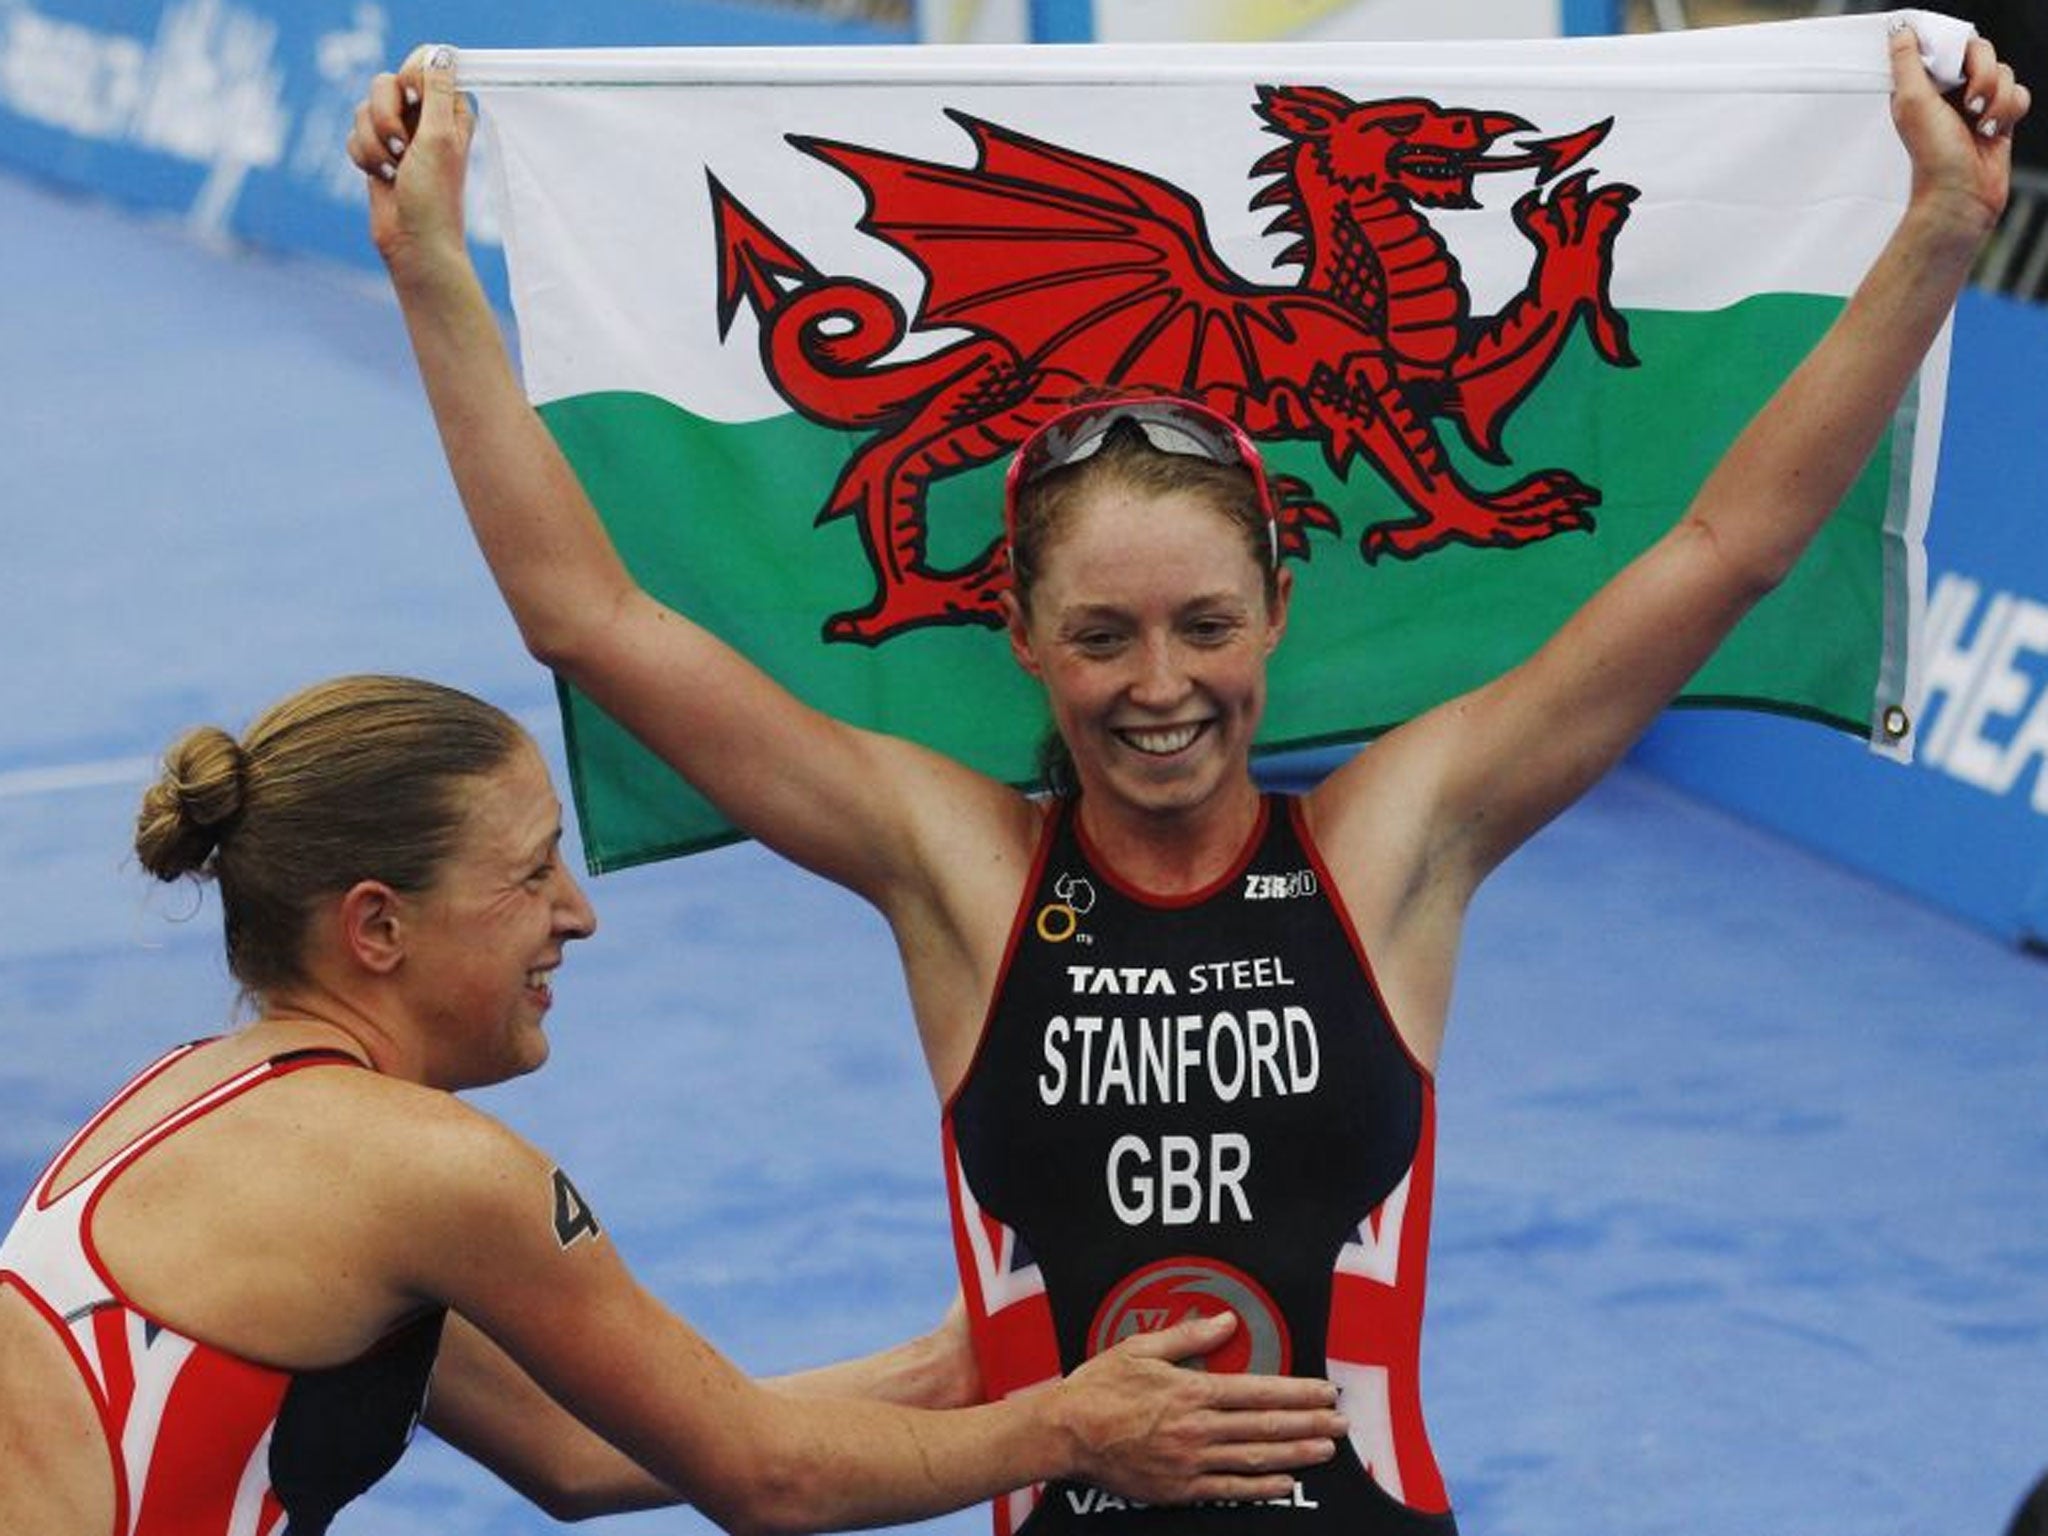 Golden girl: World champion Non Stanford raises the Welsh flag in triumph and gets a pat from silver medallist Jodie Stimpson